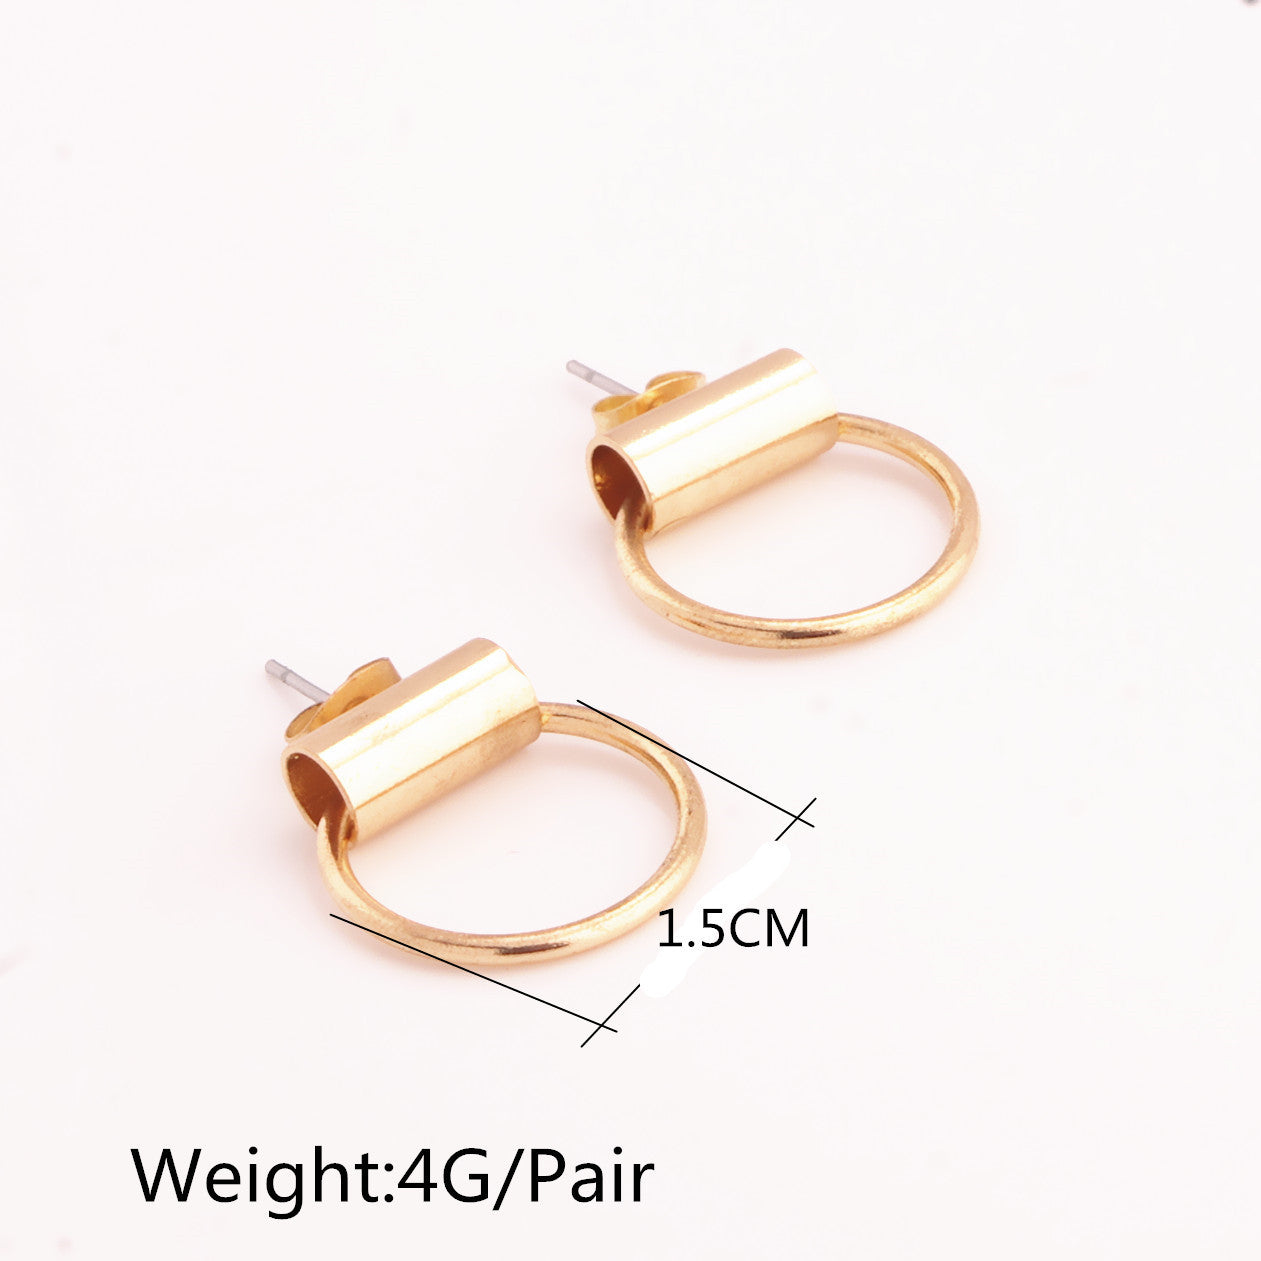 Personality Metal Ring Women's Earrings - Oh Yours Fashion - 2